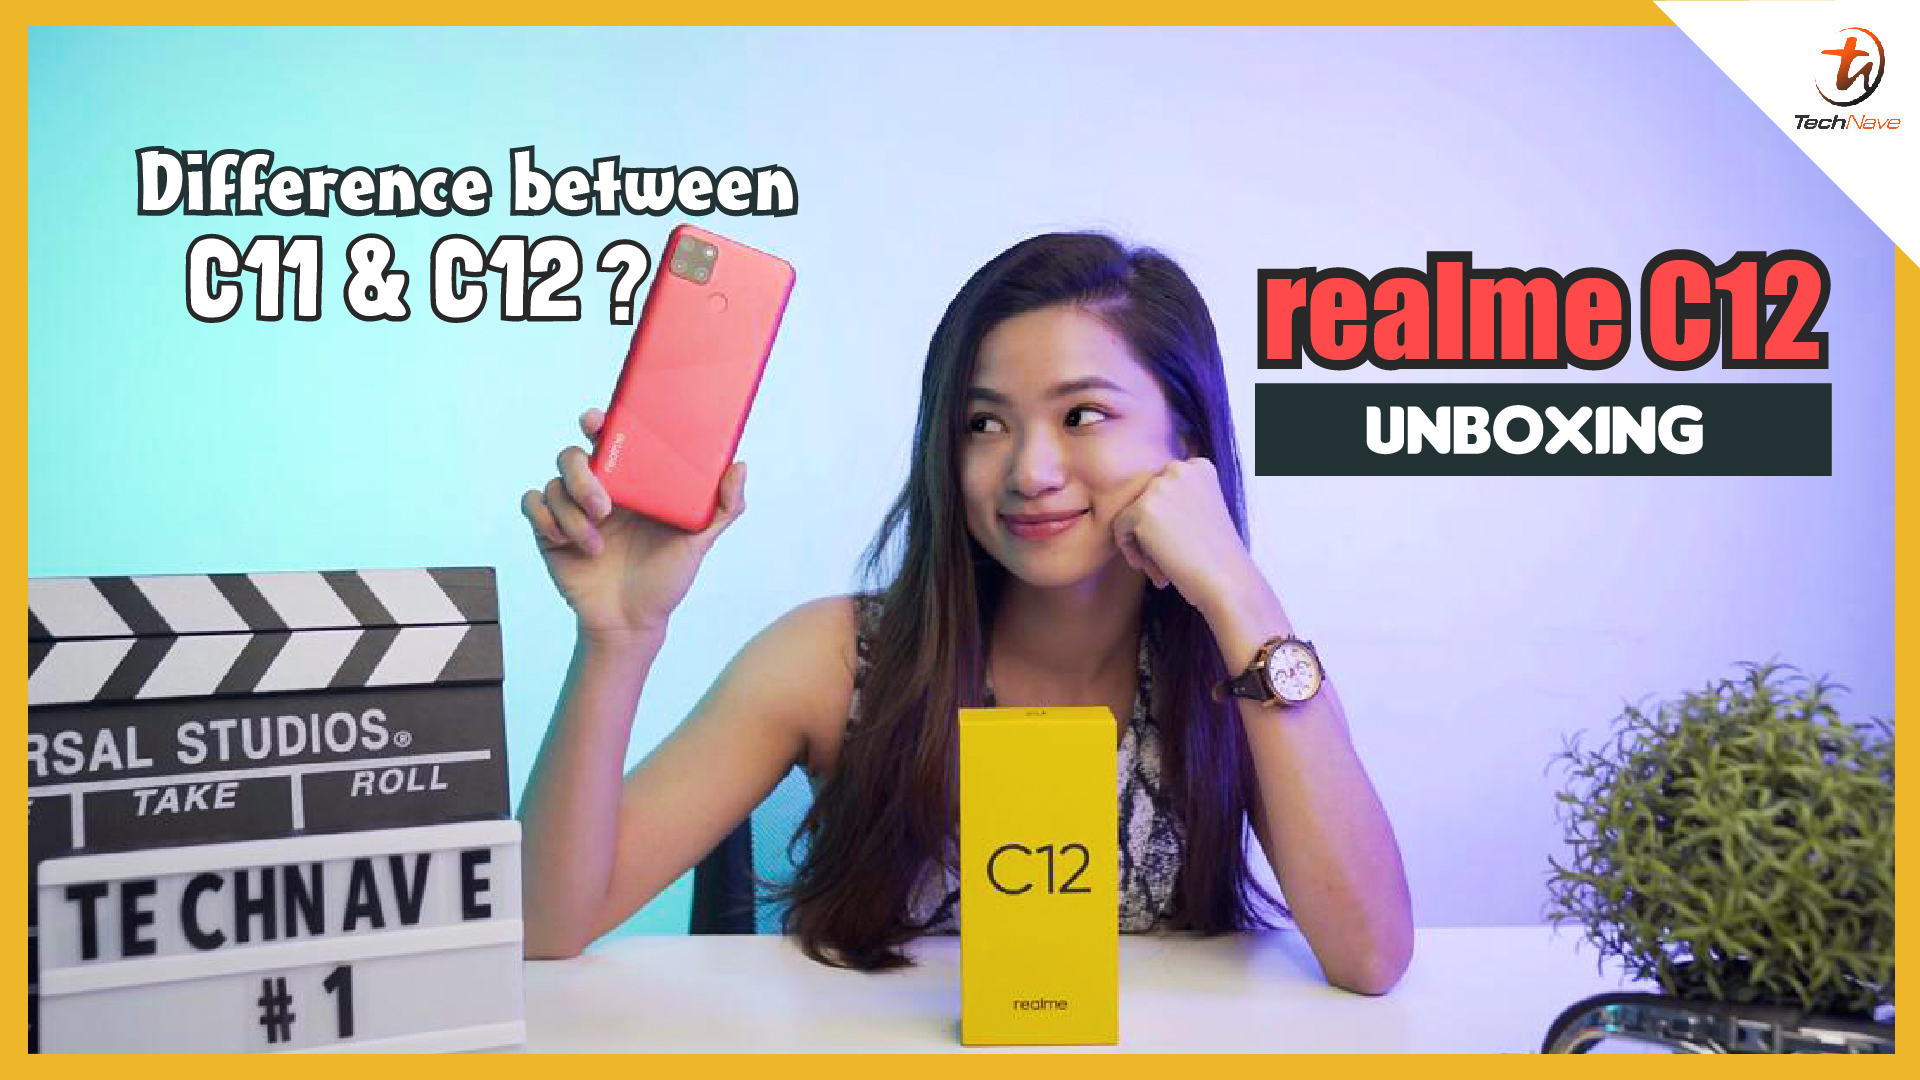 realme C12 Unboxing and Hands-On: A 6000mAh entry-level phone